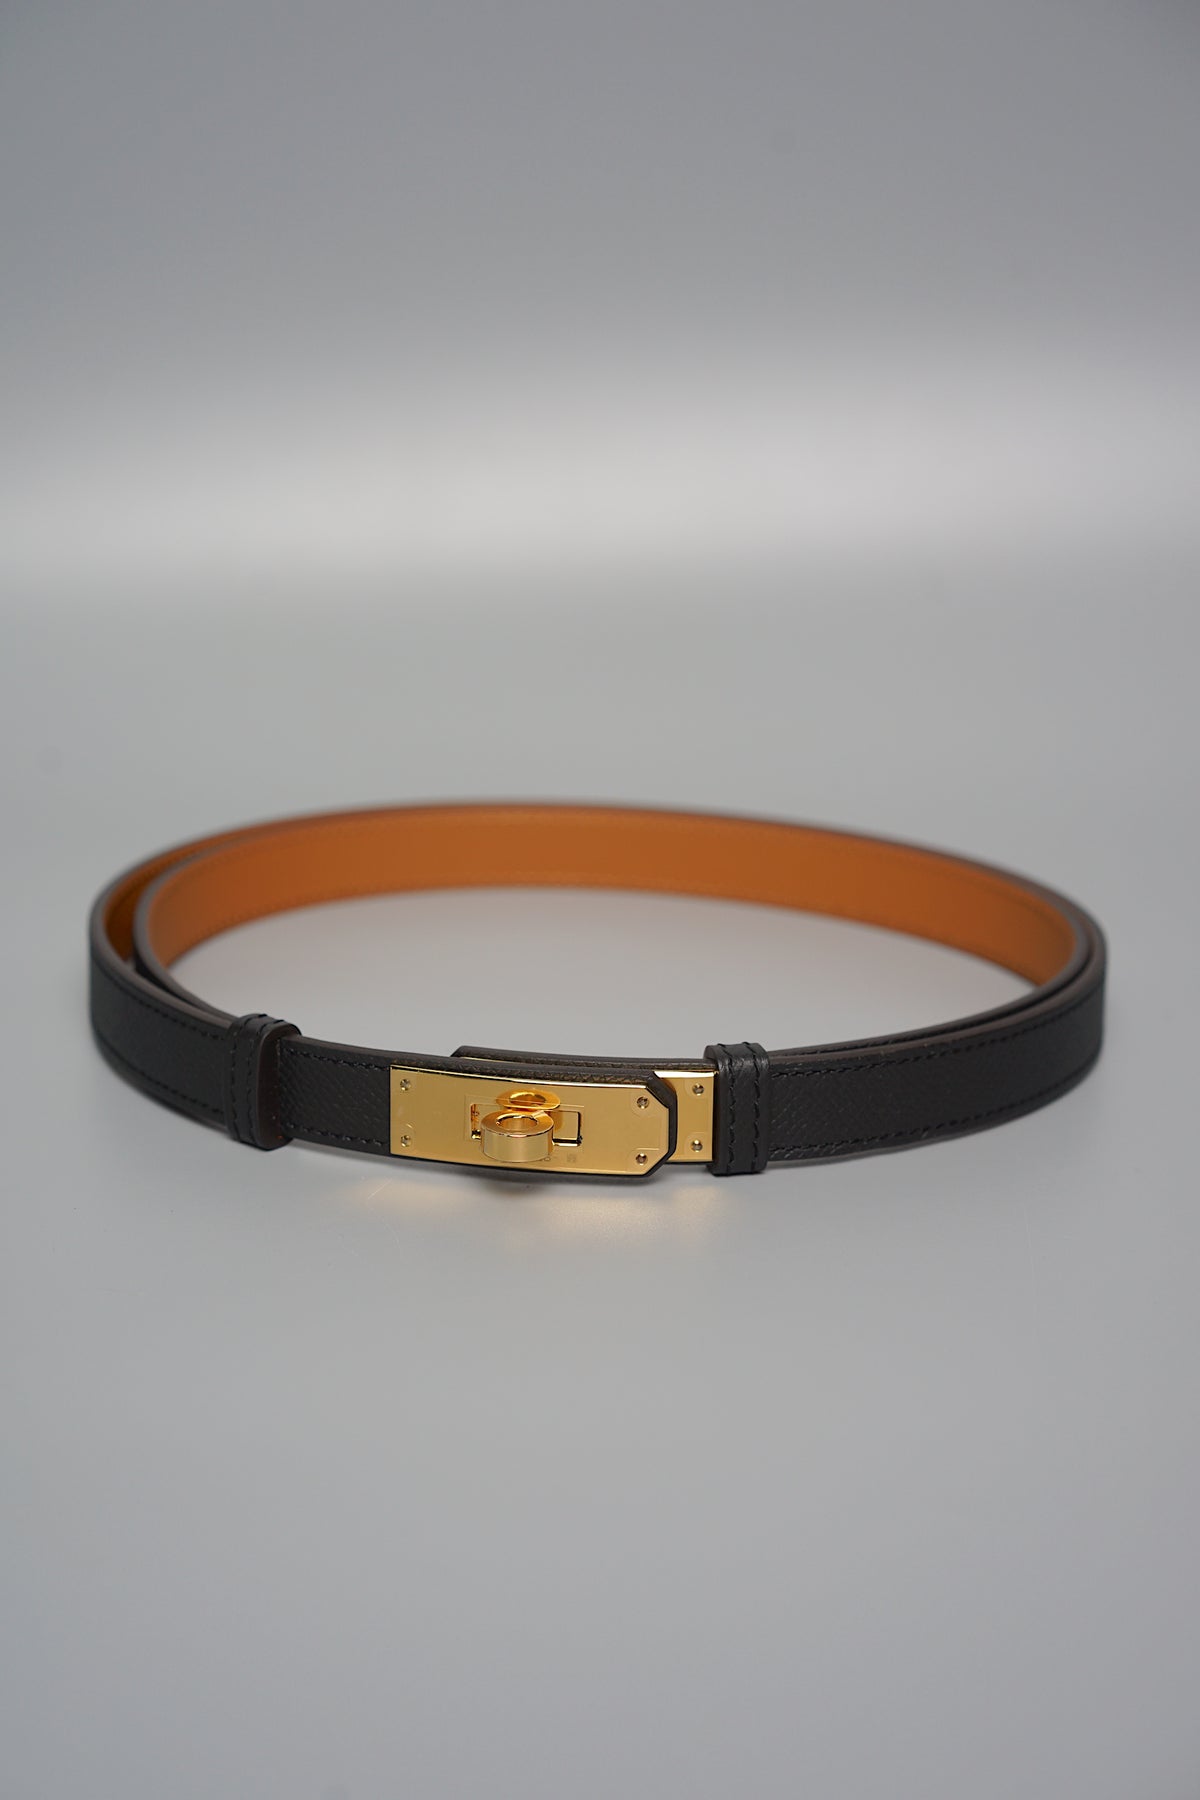 Do you know how hard it is to get the black kelly belt with GHW